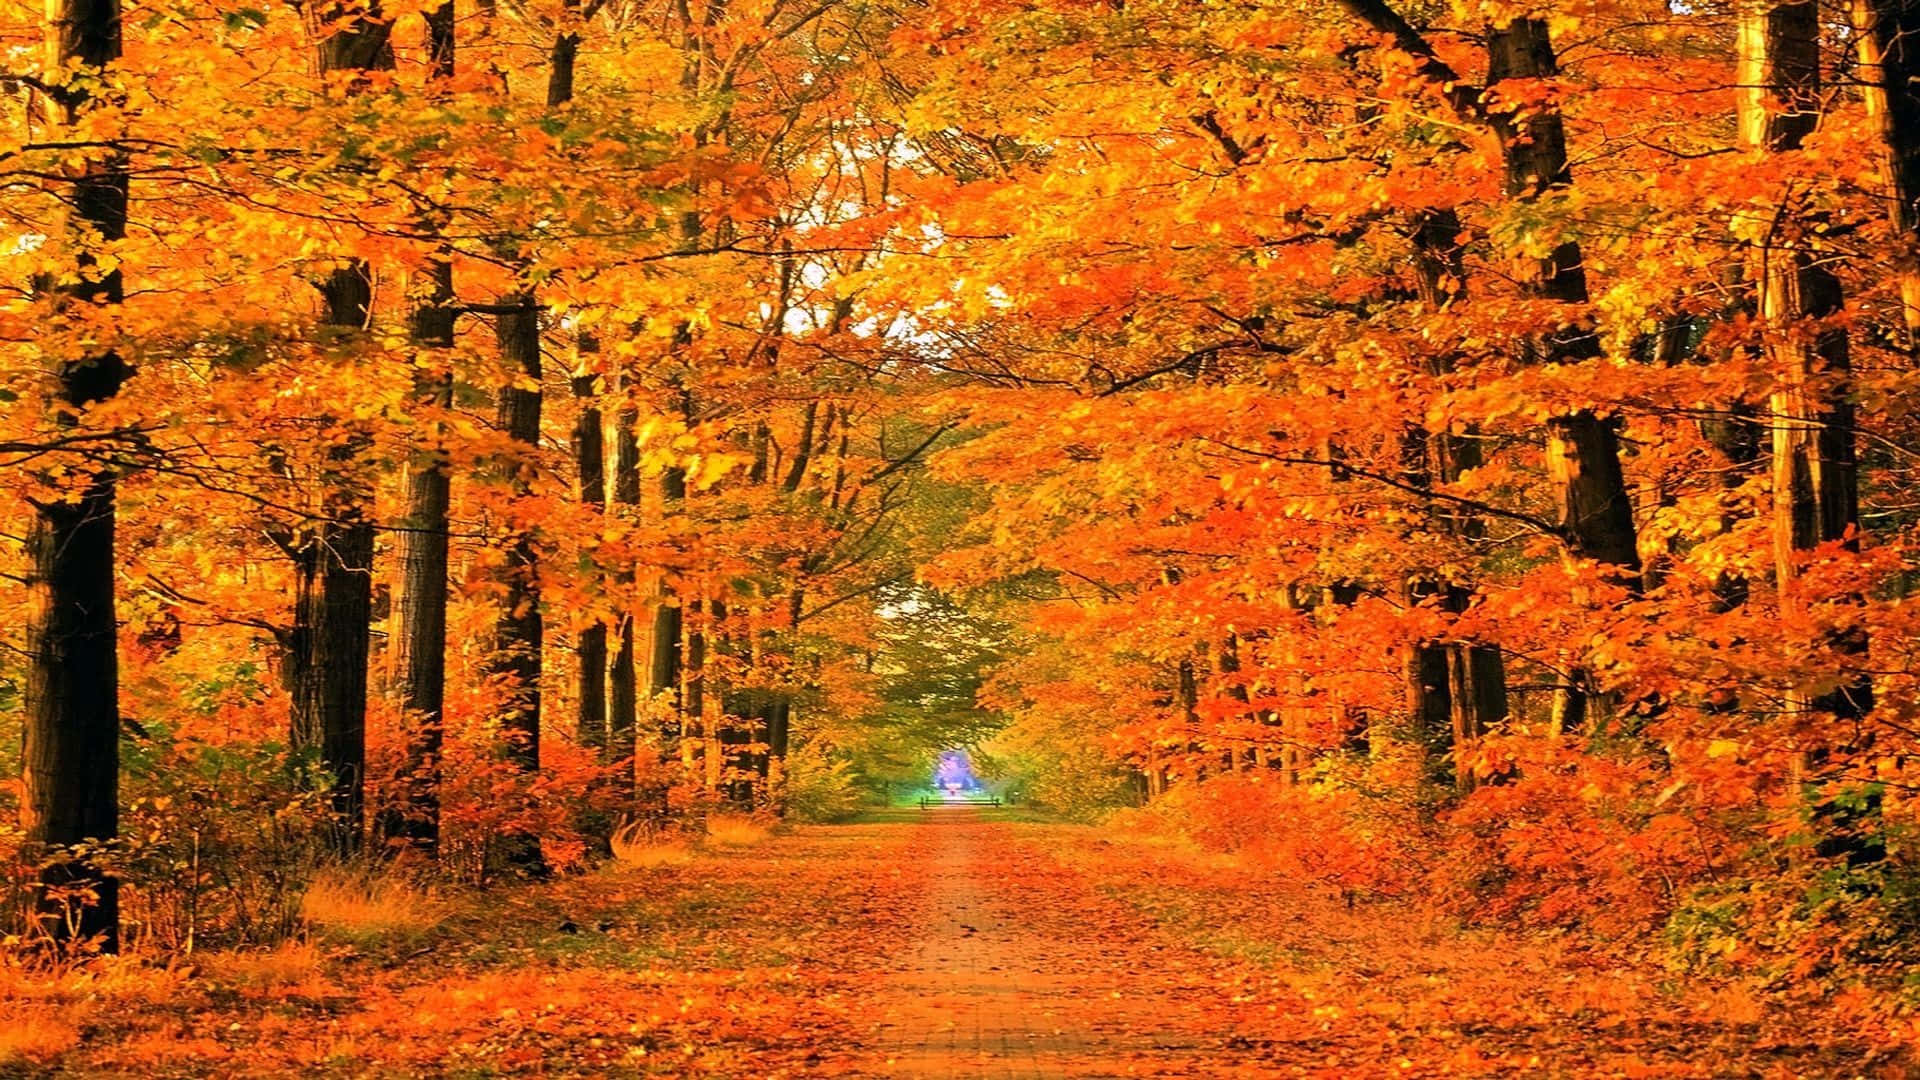 Vibrant Fall Foliage in a Serene Forest Wallpaper